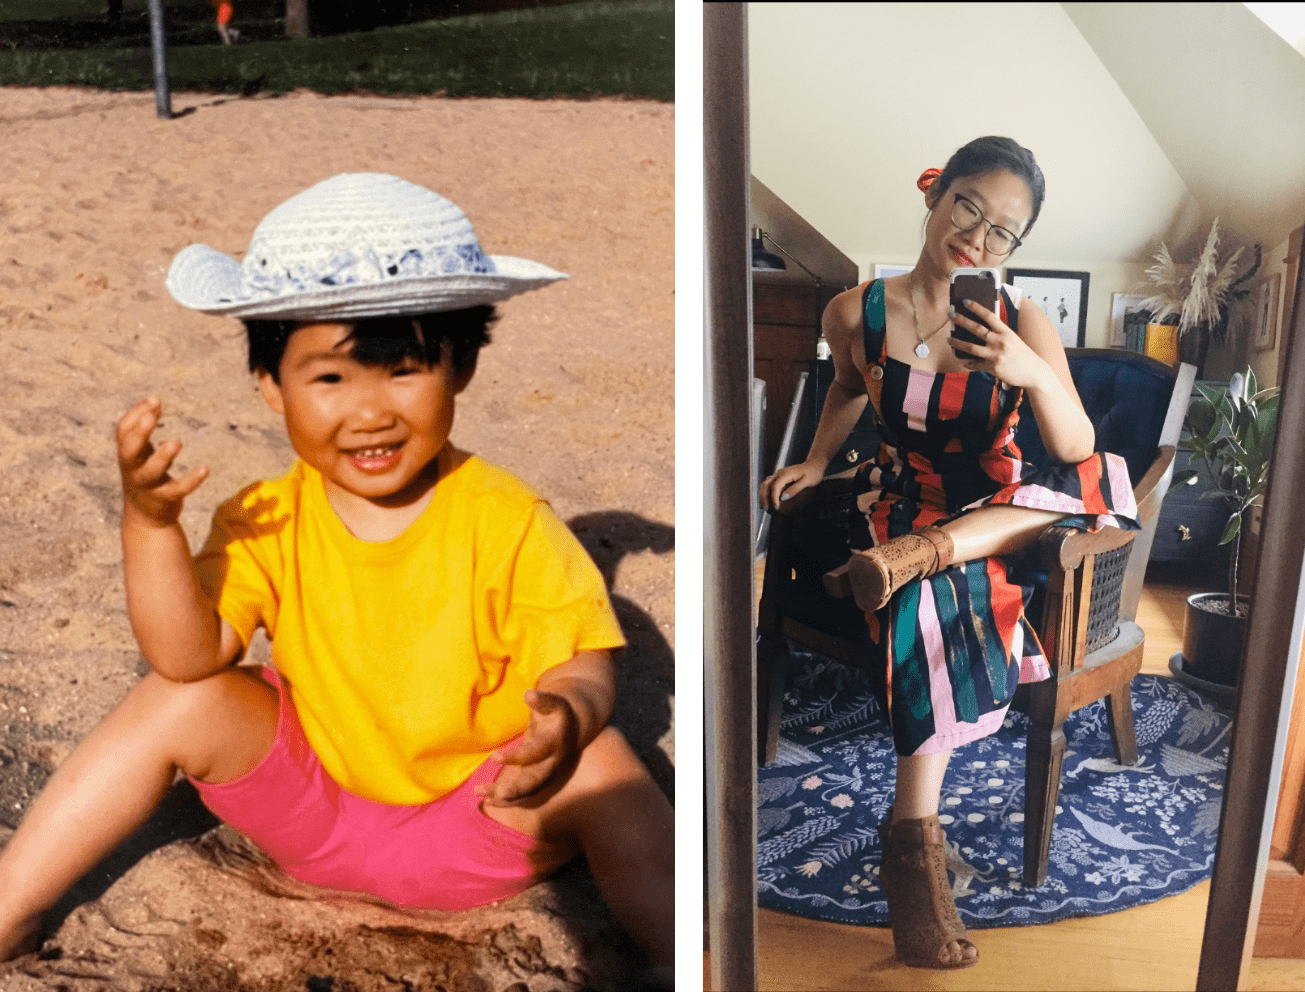 I Recreated 5 of My Favorite Childhood Outfits. Here's What I Came Up With...